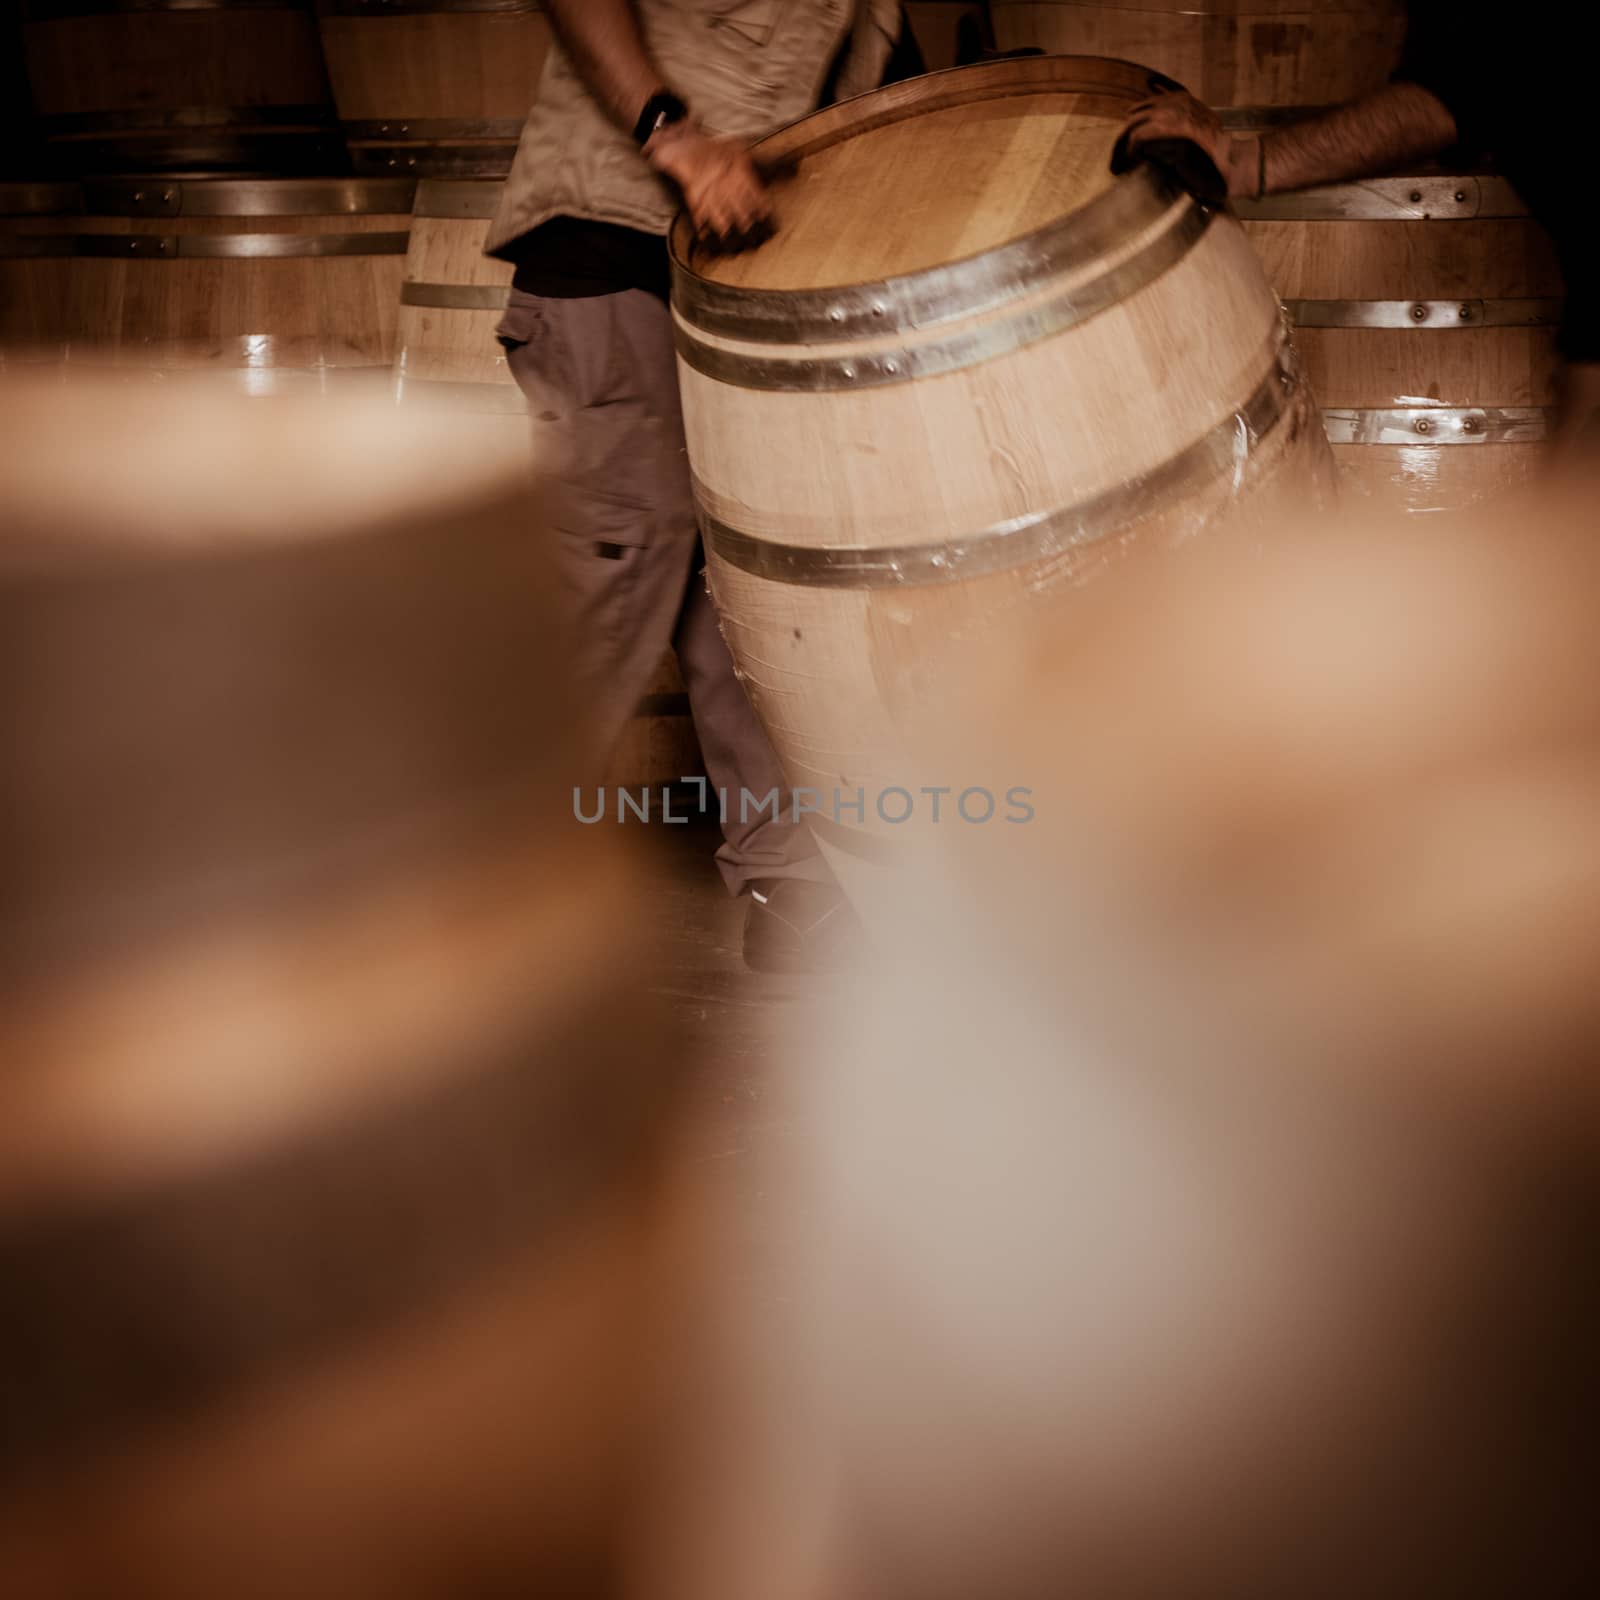 Winemaker barrels moving up or down by rolling on the ground in a large storage cellar, Bordeaux Vineyard, France